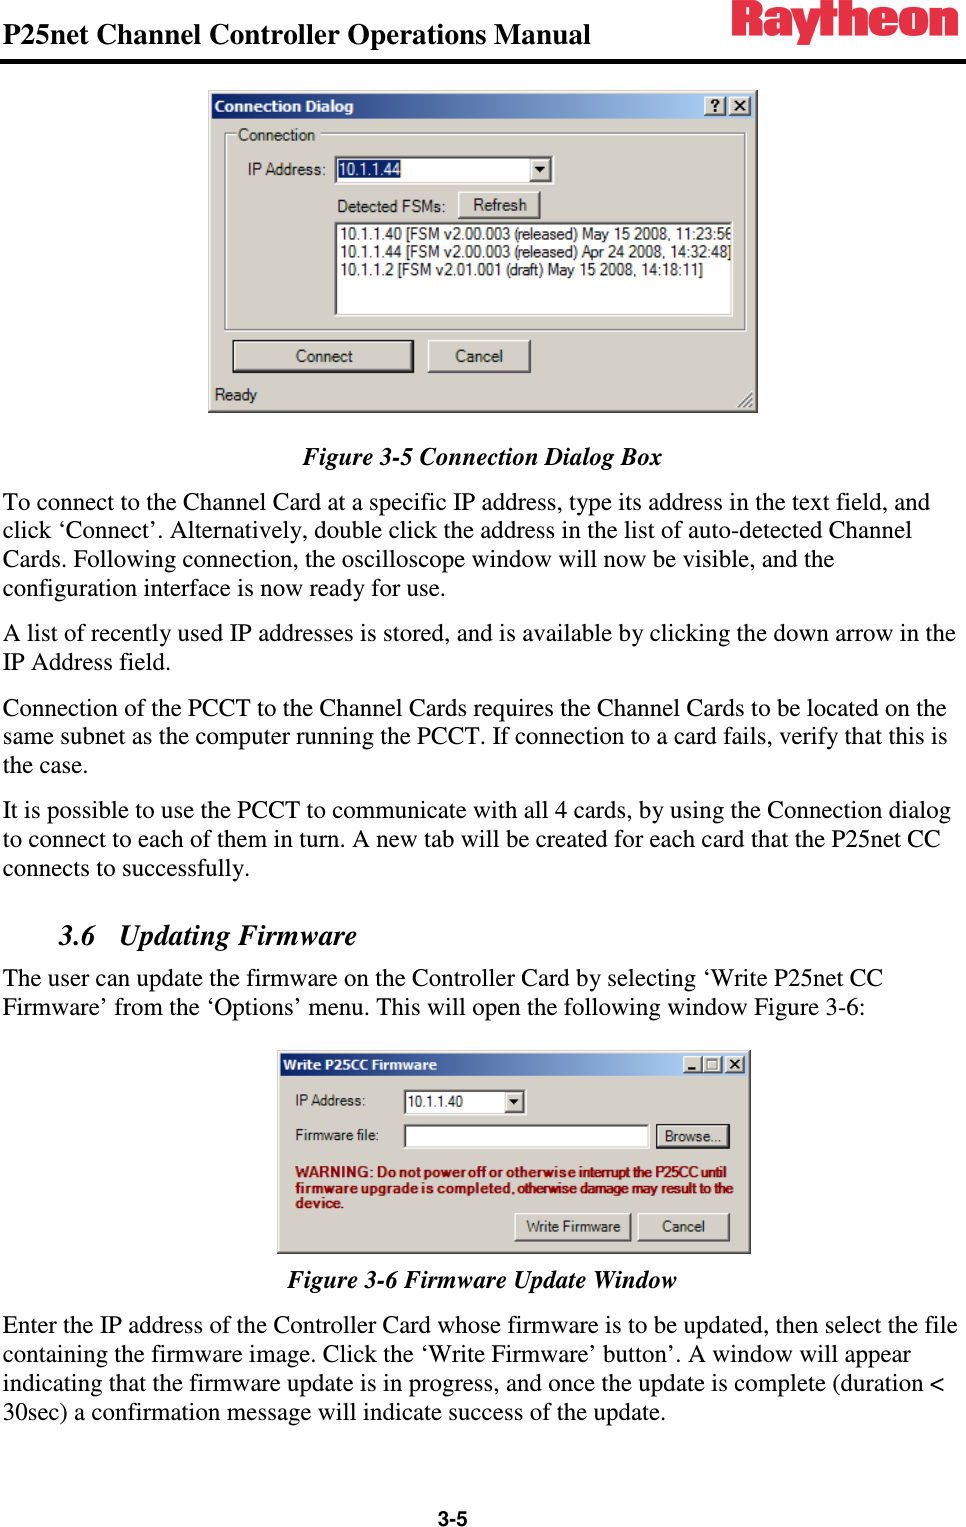 P25net Channel Controller Operations Manual                 3-5  Figure 3-5 Connection Dialog Box To connect to the Channel Card at a specific IP address, type its address in the text field, and click ‘Connect’. Alternatively, double click the address in the list of auto-detected Channel Cards. Following connection, the oscilloscope window will now be visible, and the configuration interface is now ready for use. A list of recently used IP addresses is stored, and is available by clicking the down arrow in the IP Address field. Connection of the PCCT to the Channel Cards requires the Channel Cards to be located on the same subnet as the computer running the PCCT. If connection to a card fails, verify that this is the case. It is possible to use the PCCT to communicate with all 4 cards, by using the Connection dialog to connect to each of them in turn. A new tab will be created for each card that the P25net CC connects to successfully. 3.6 Updating Firmware The user can update the firmware on the Controller Card by selecting ‘Write P25net CC Firmware’ from the ‘Options’ menu. This will open the following window Figure 3-6:  Figure 3-6 Firmware Update Window Enter the IP address of the Controller Card whose firmware is to be updated, then select the file containing the firmware image. Click the ‘Write Firmware’ button’. A window will appear indicating that the firmware update is in progress, and once the update is complete (duration &lt; 30sec) a confirmation message will indicate success of the update. 